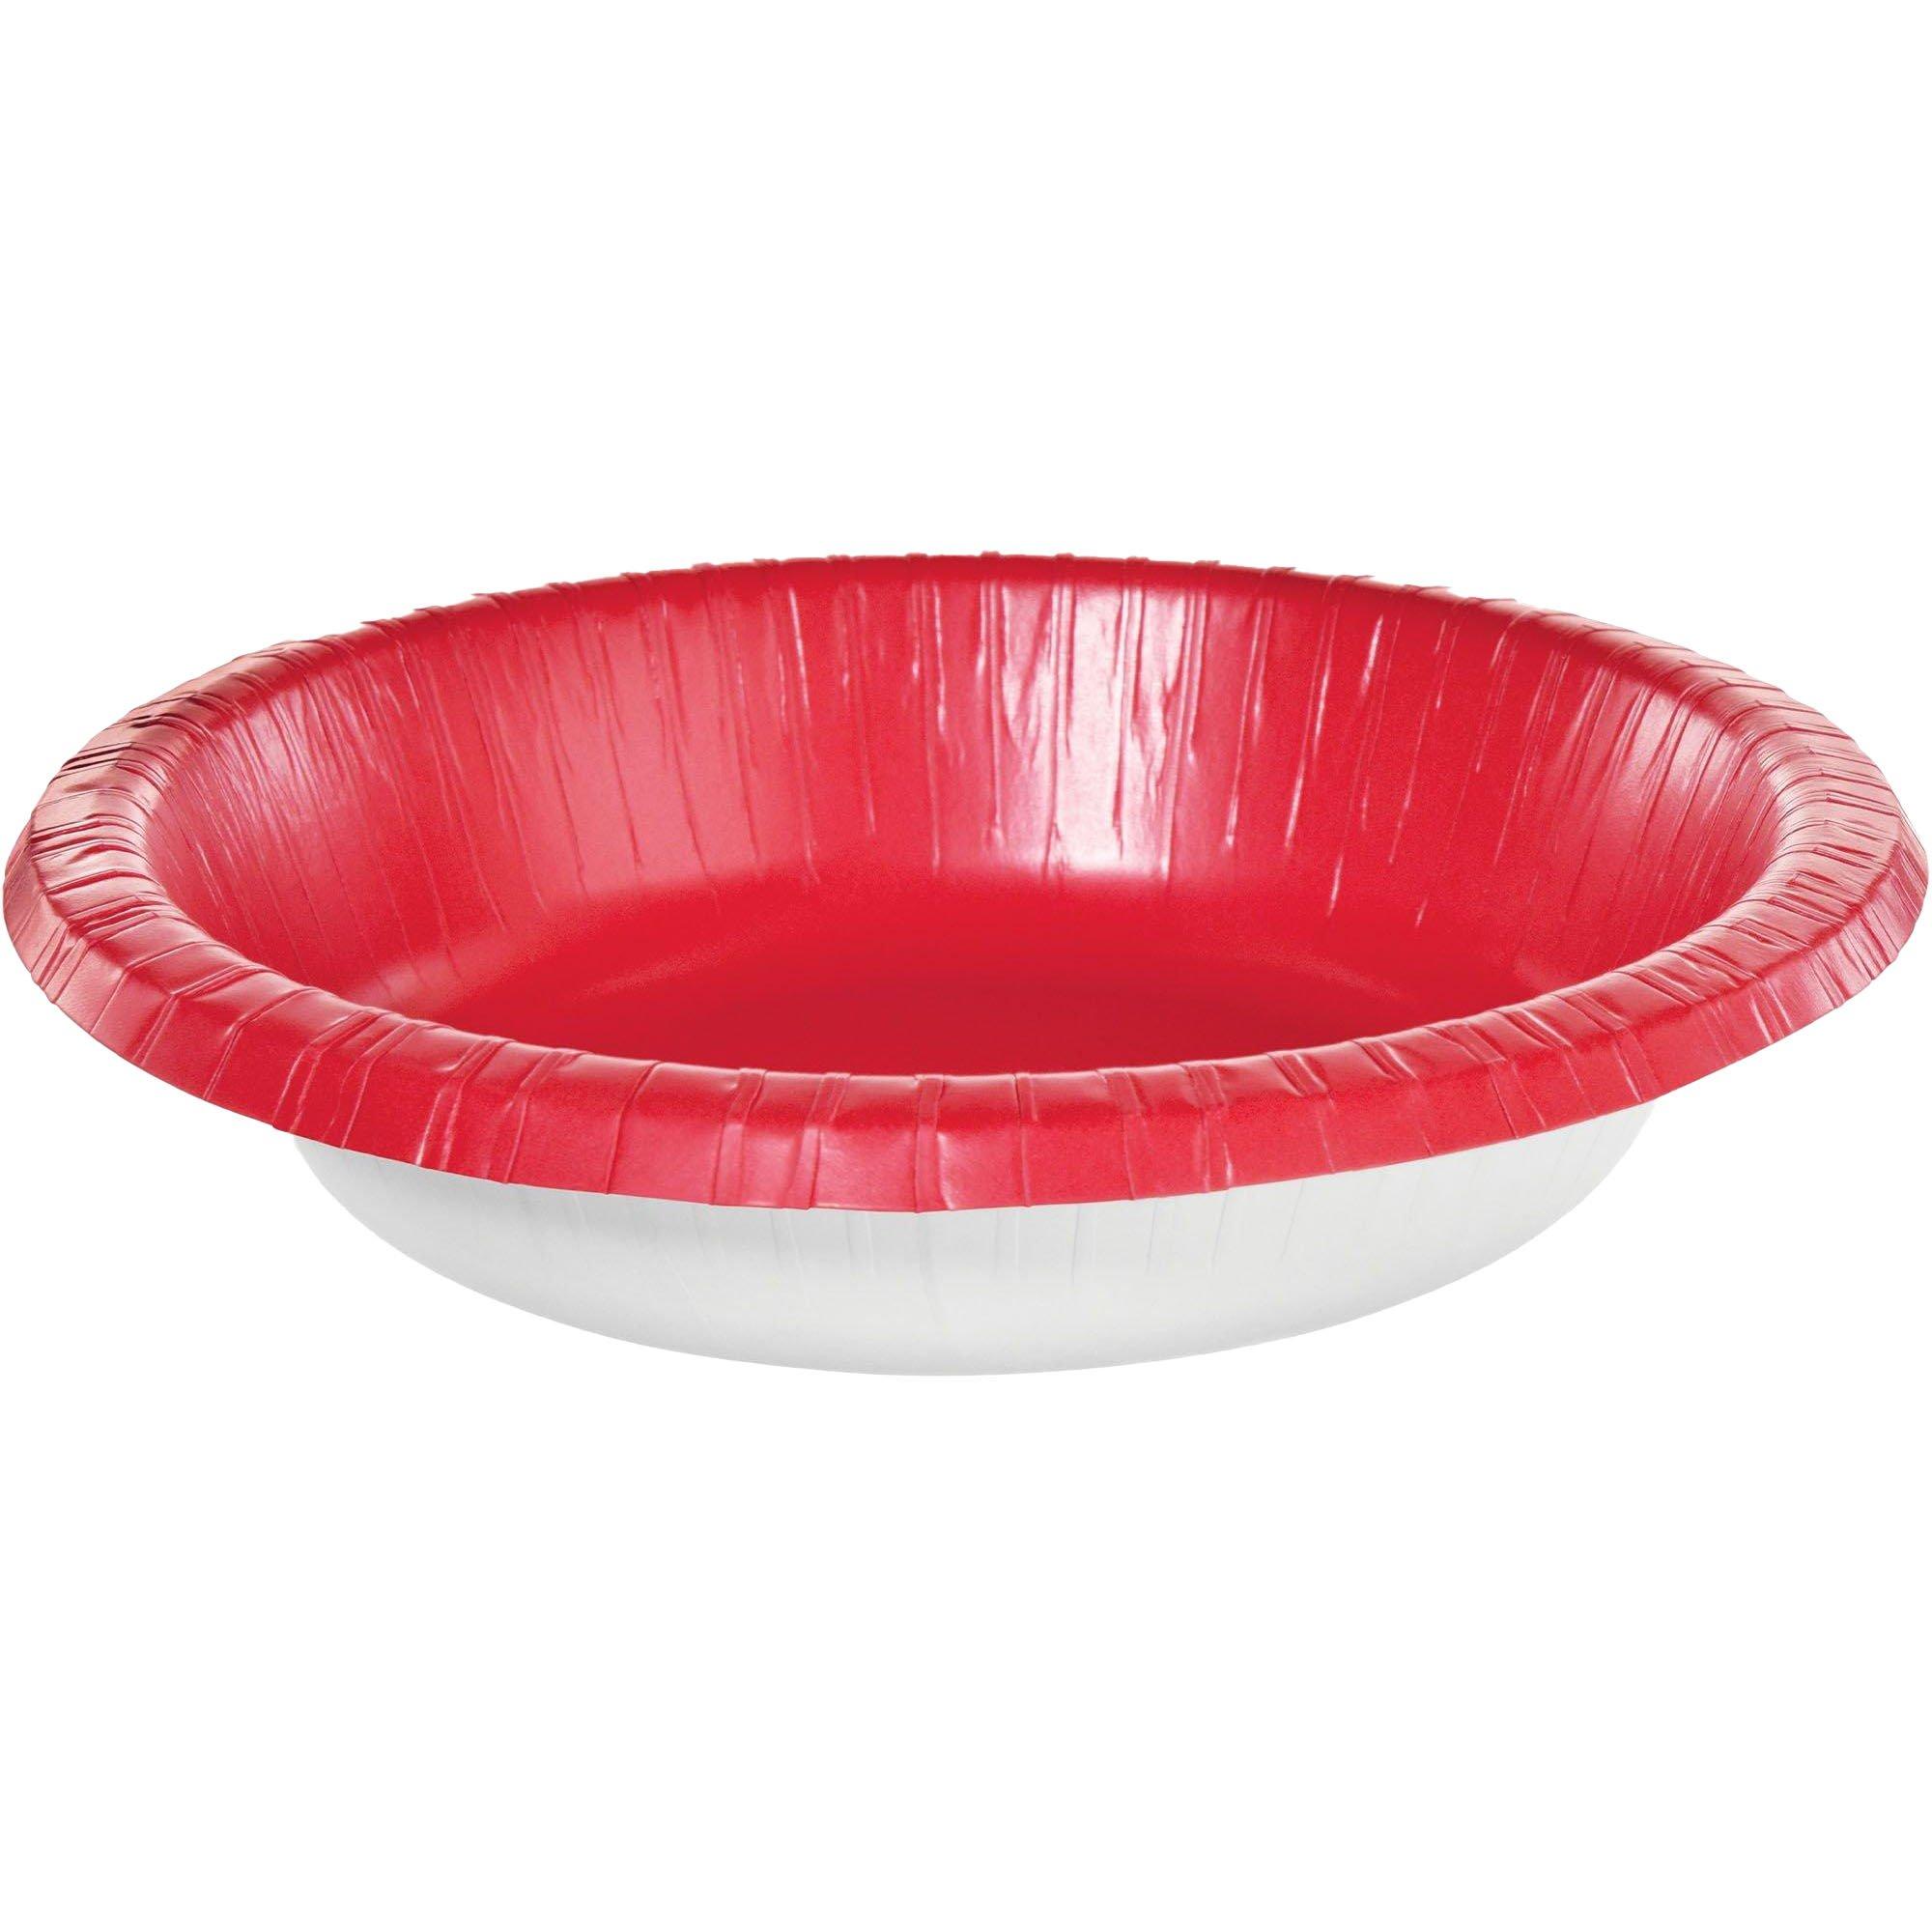 Translucent Red Square Bowl – 11 Inches